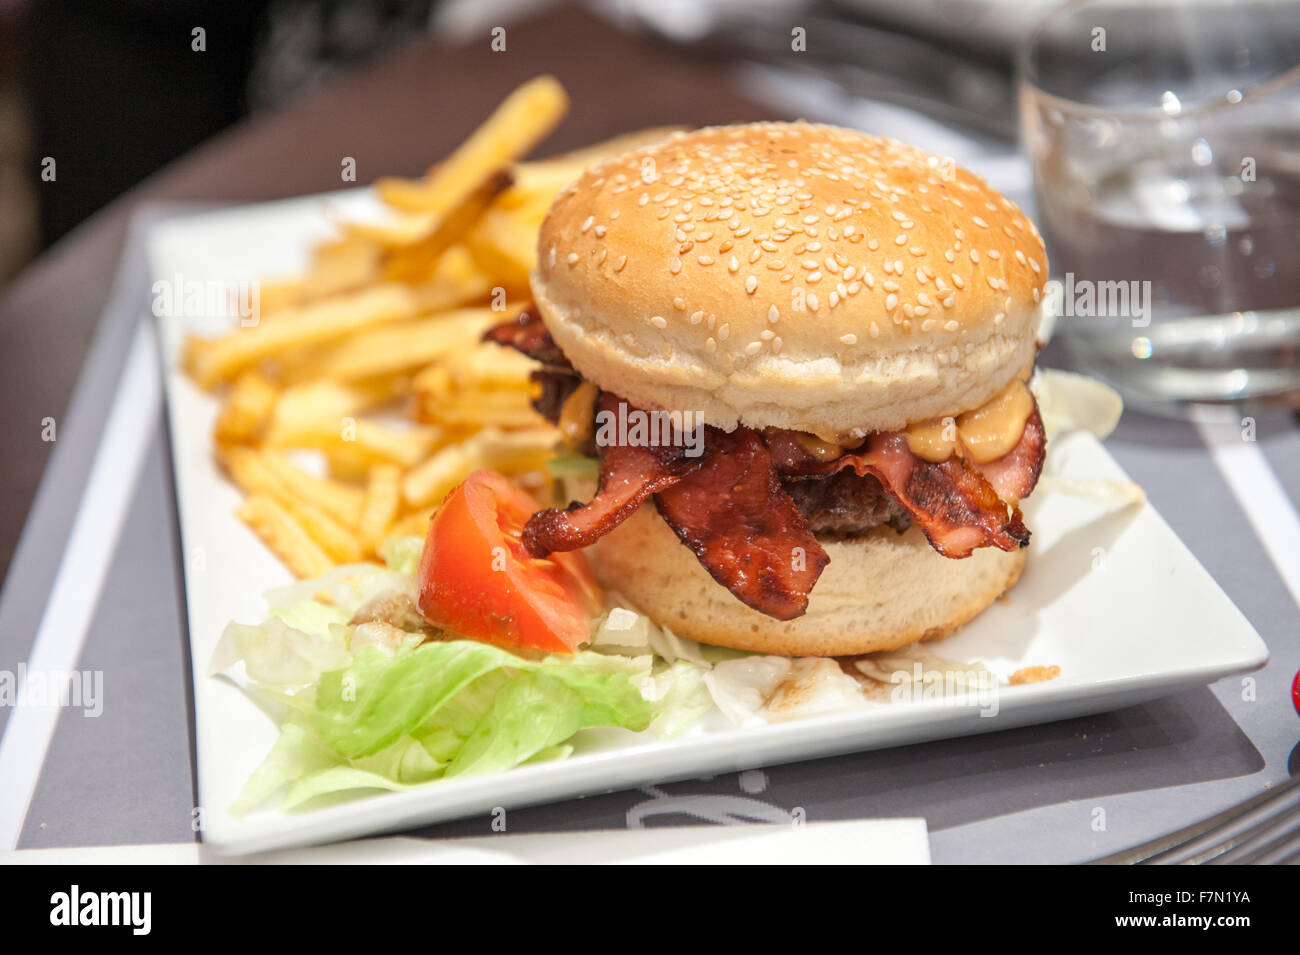 Close up of a bacon cheese burger and fries on a plate Stock Photo